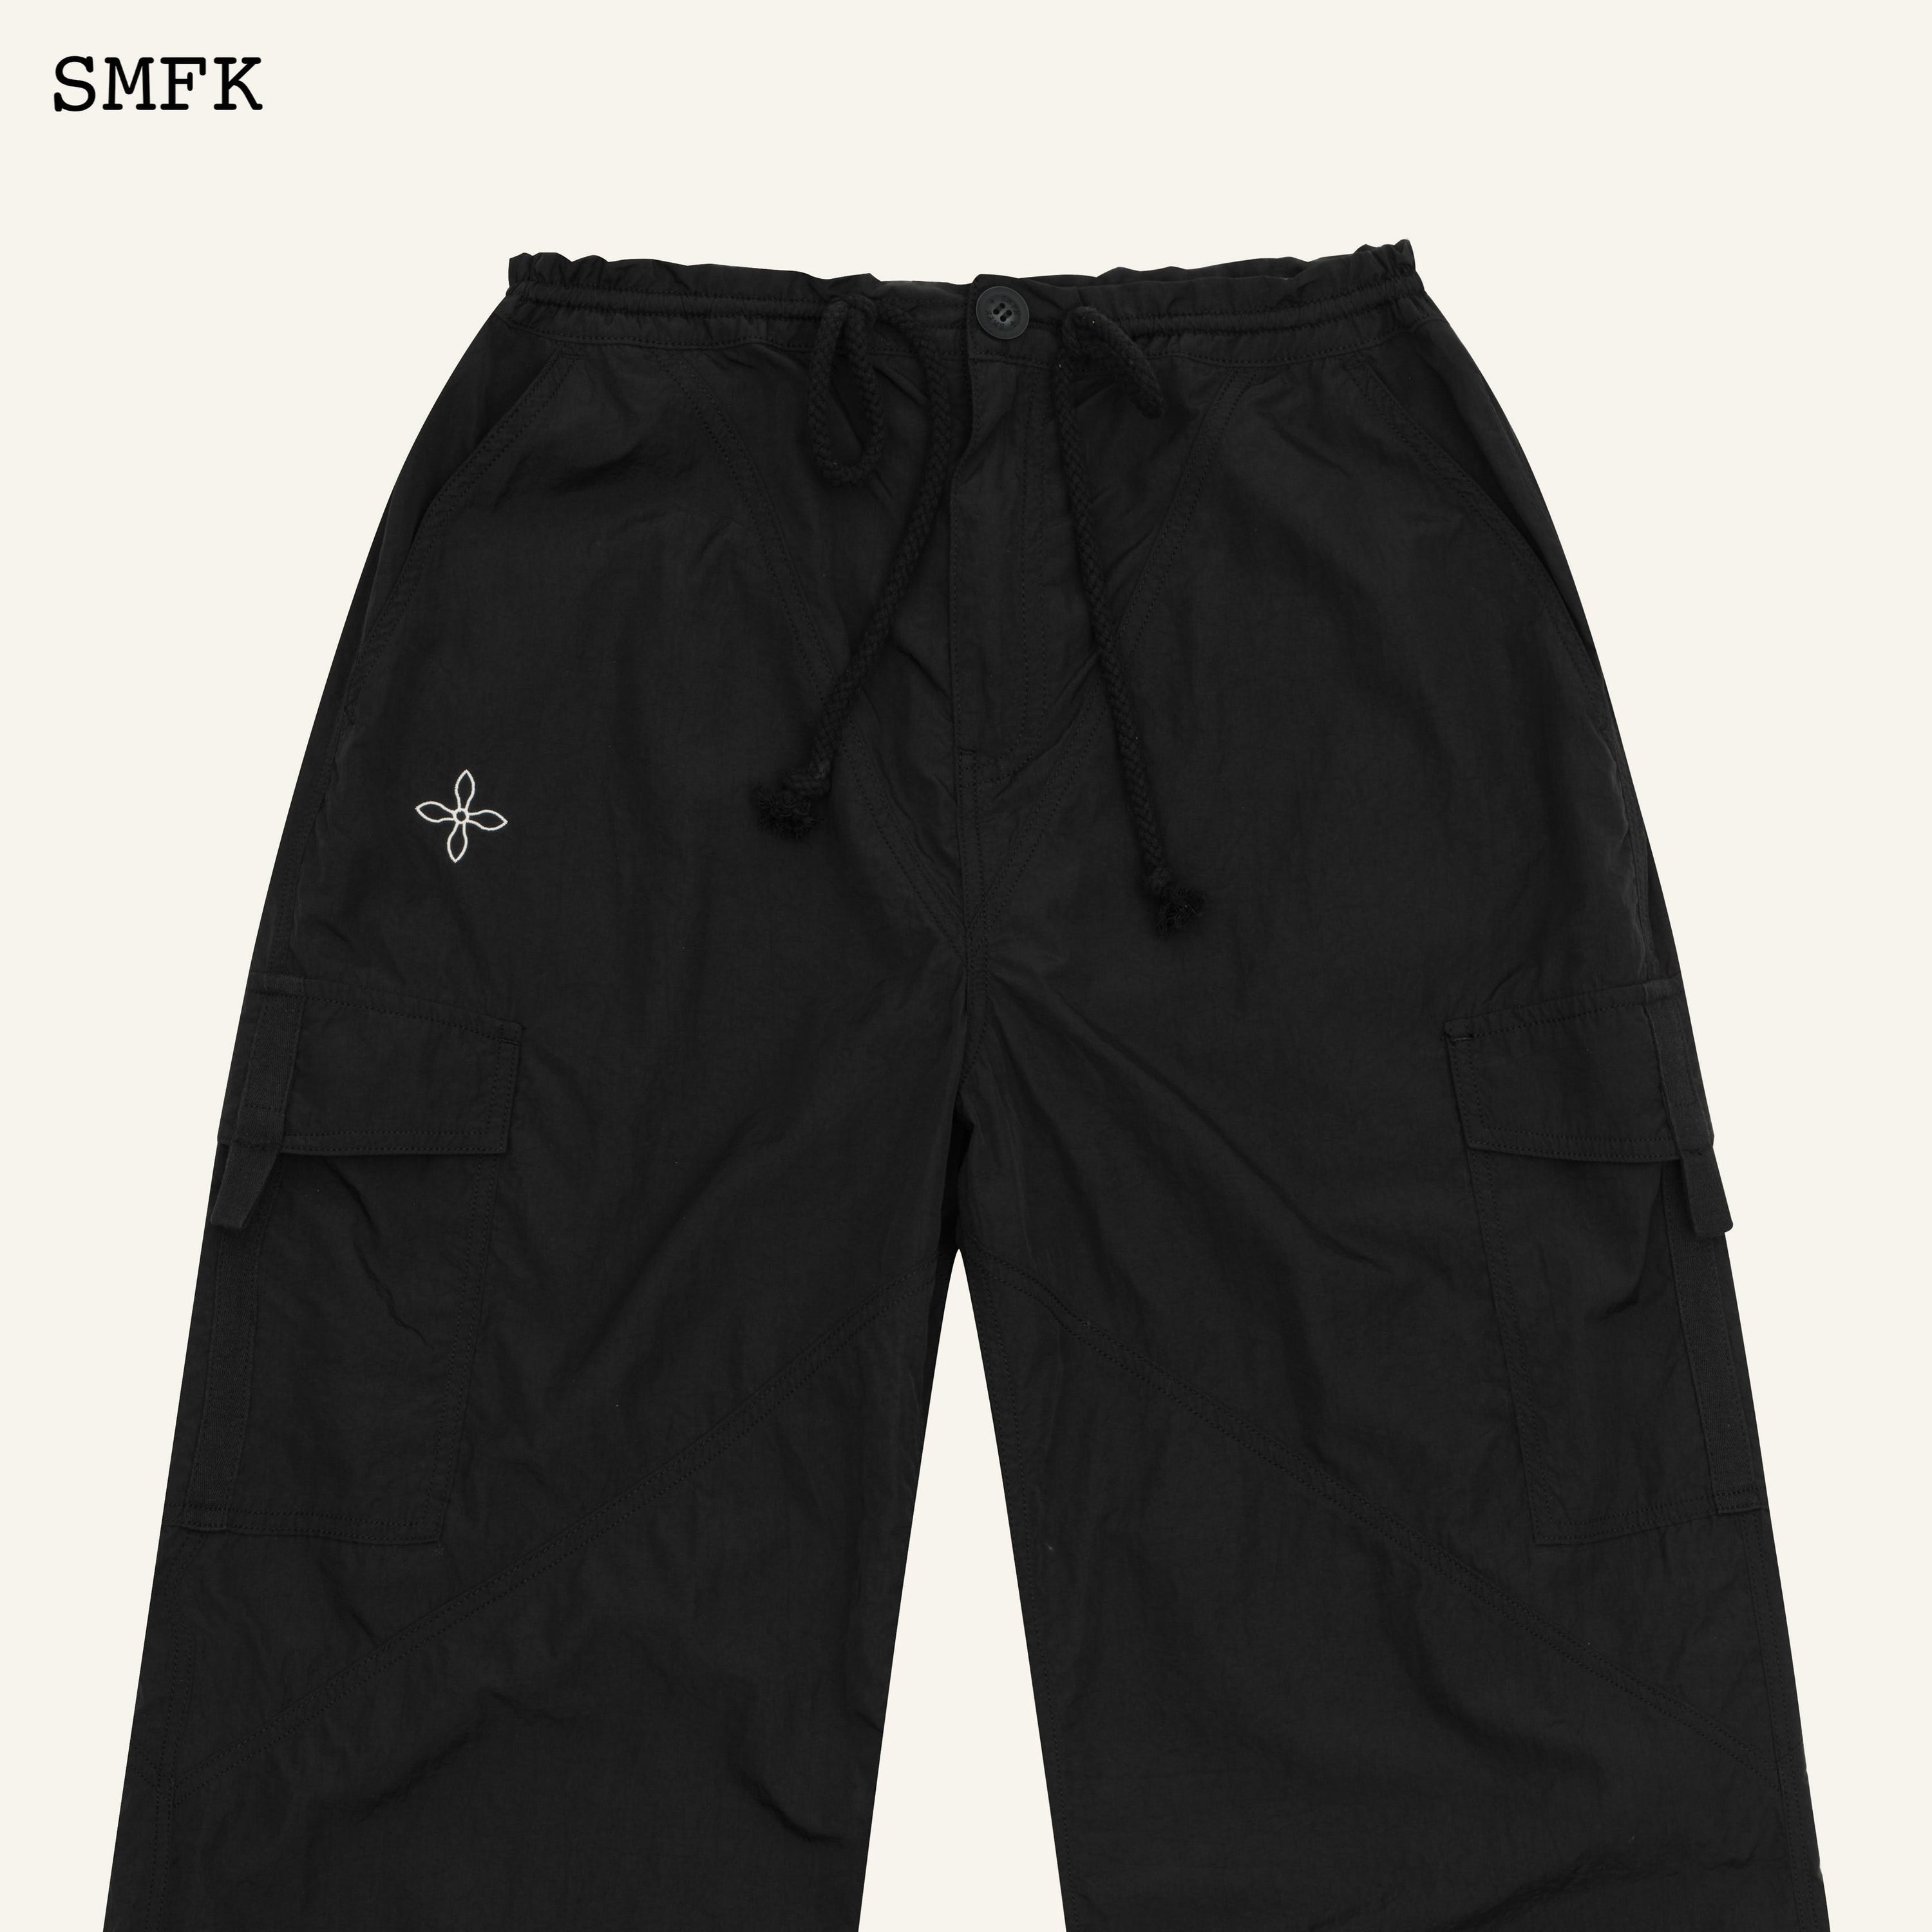 Compass Cross Classic Paratrooper Pants In Black - SMFK Official